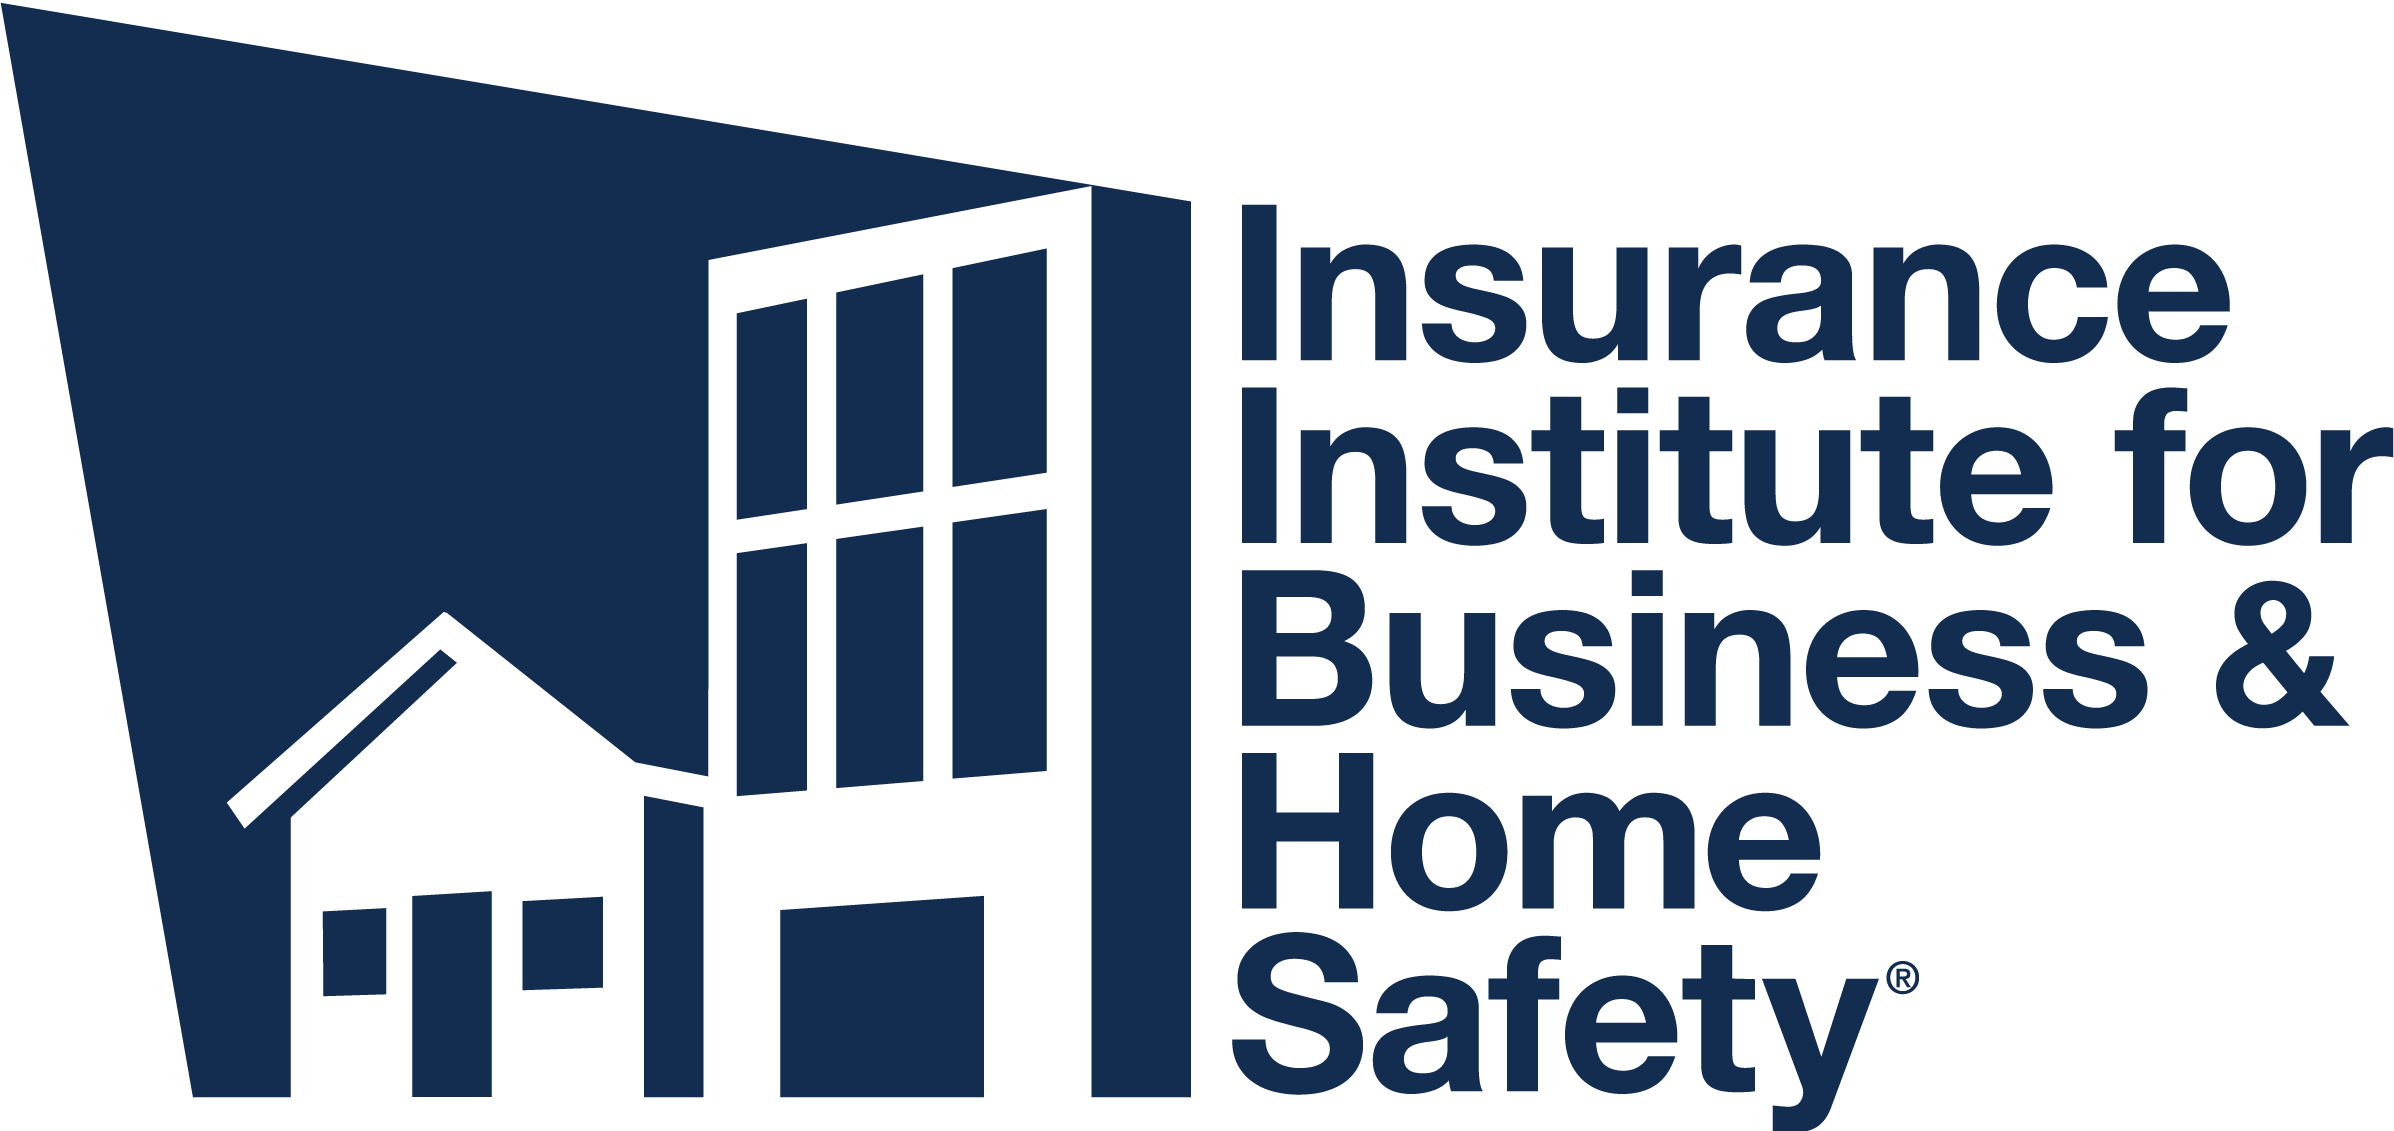 Insurance Institute for Business and Home Safety (IBHS)'s logo